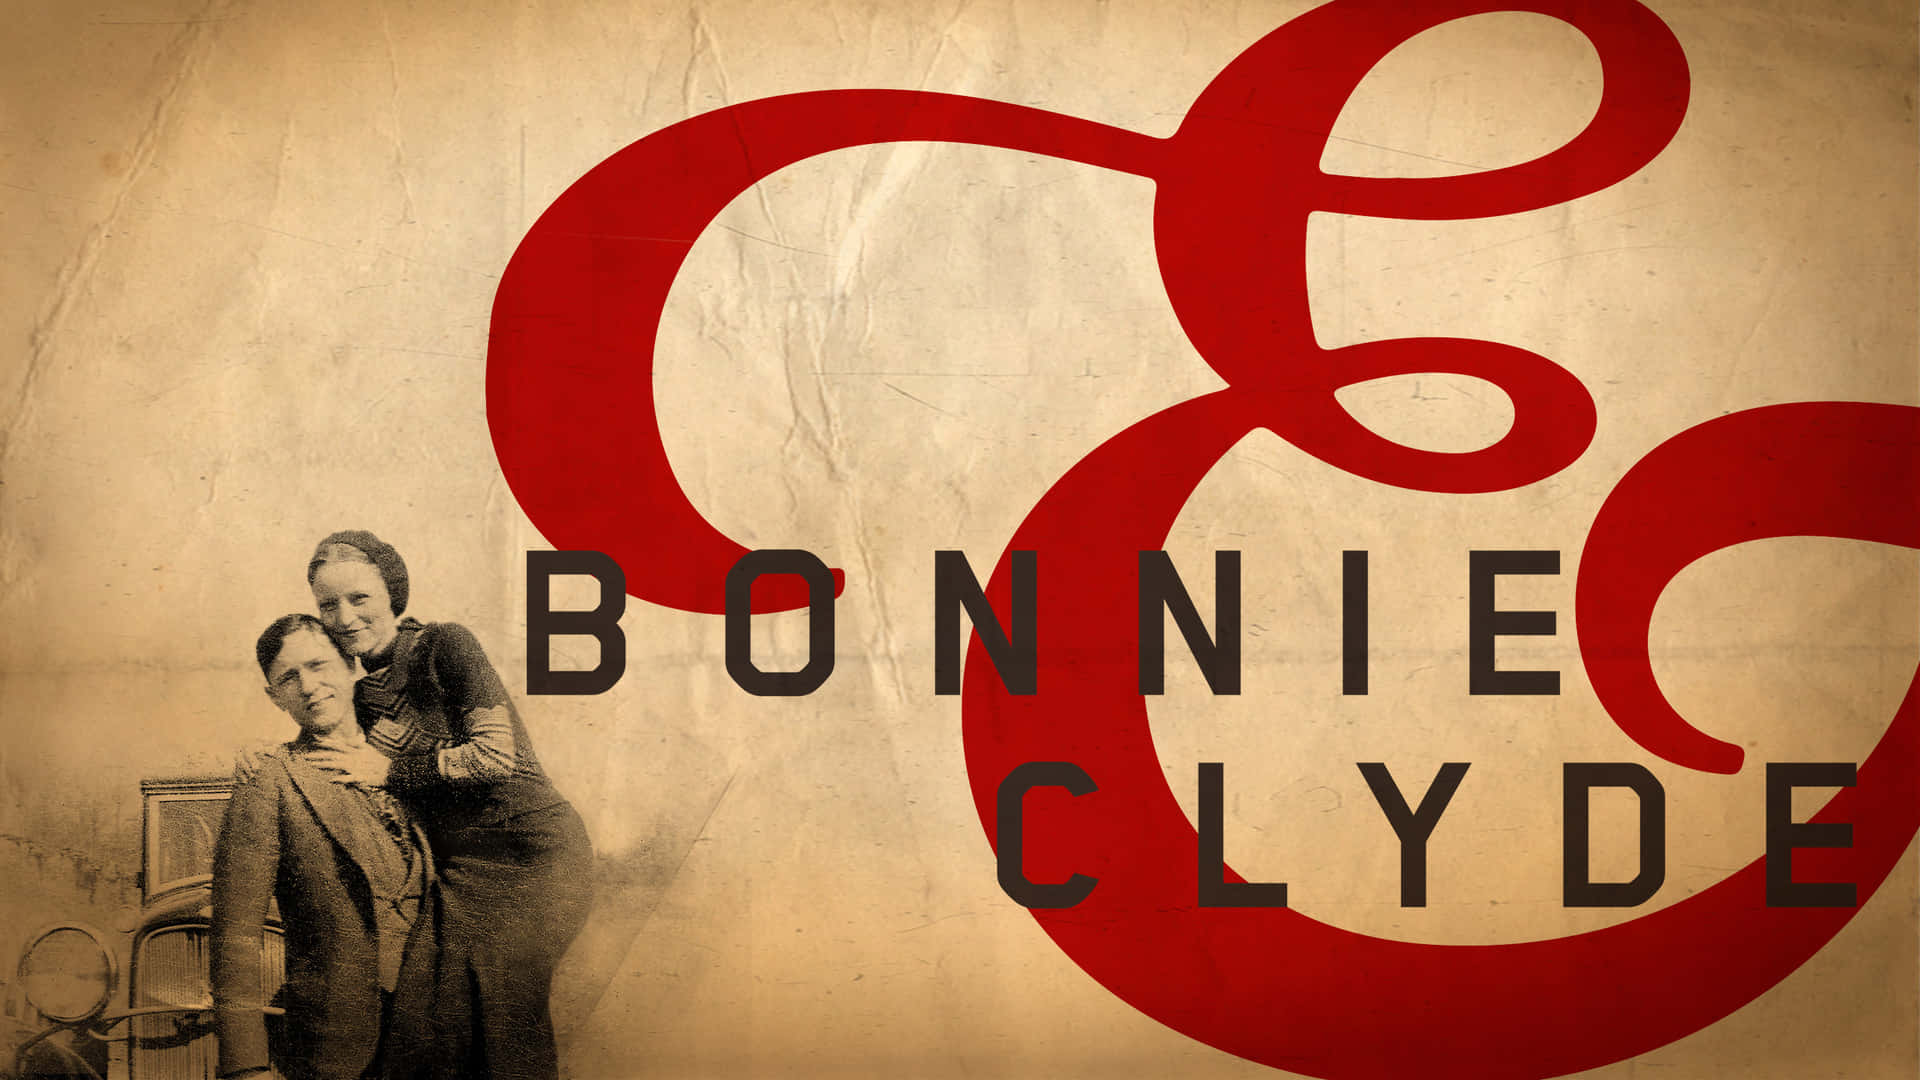 Bonnie and Clyde together forever.